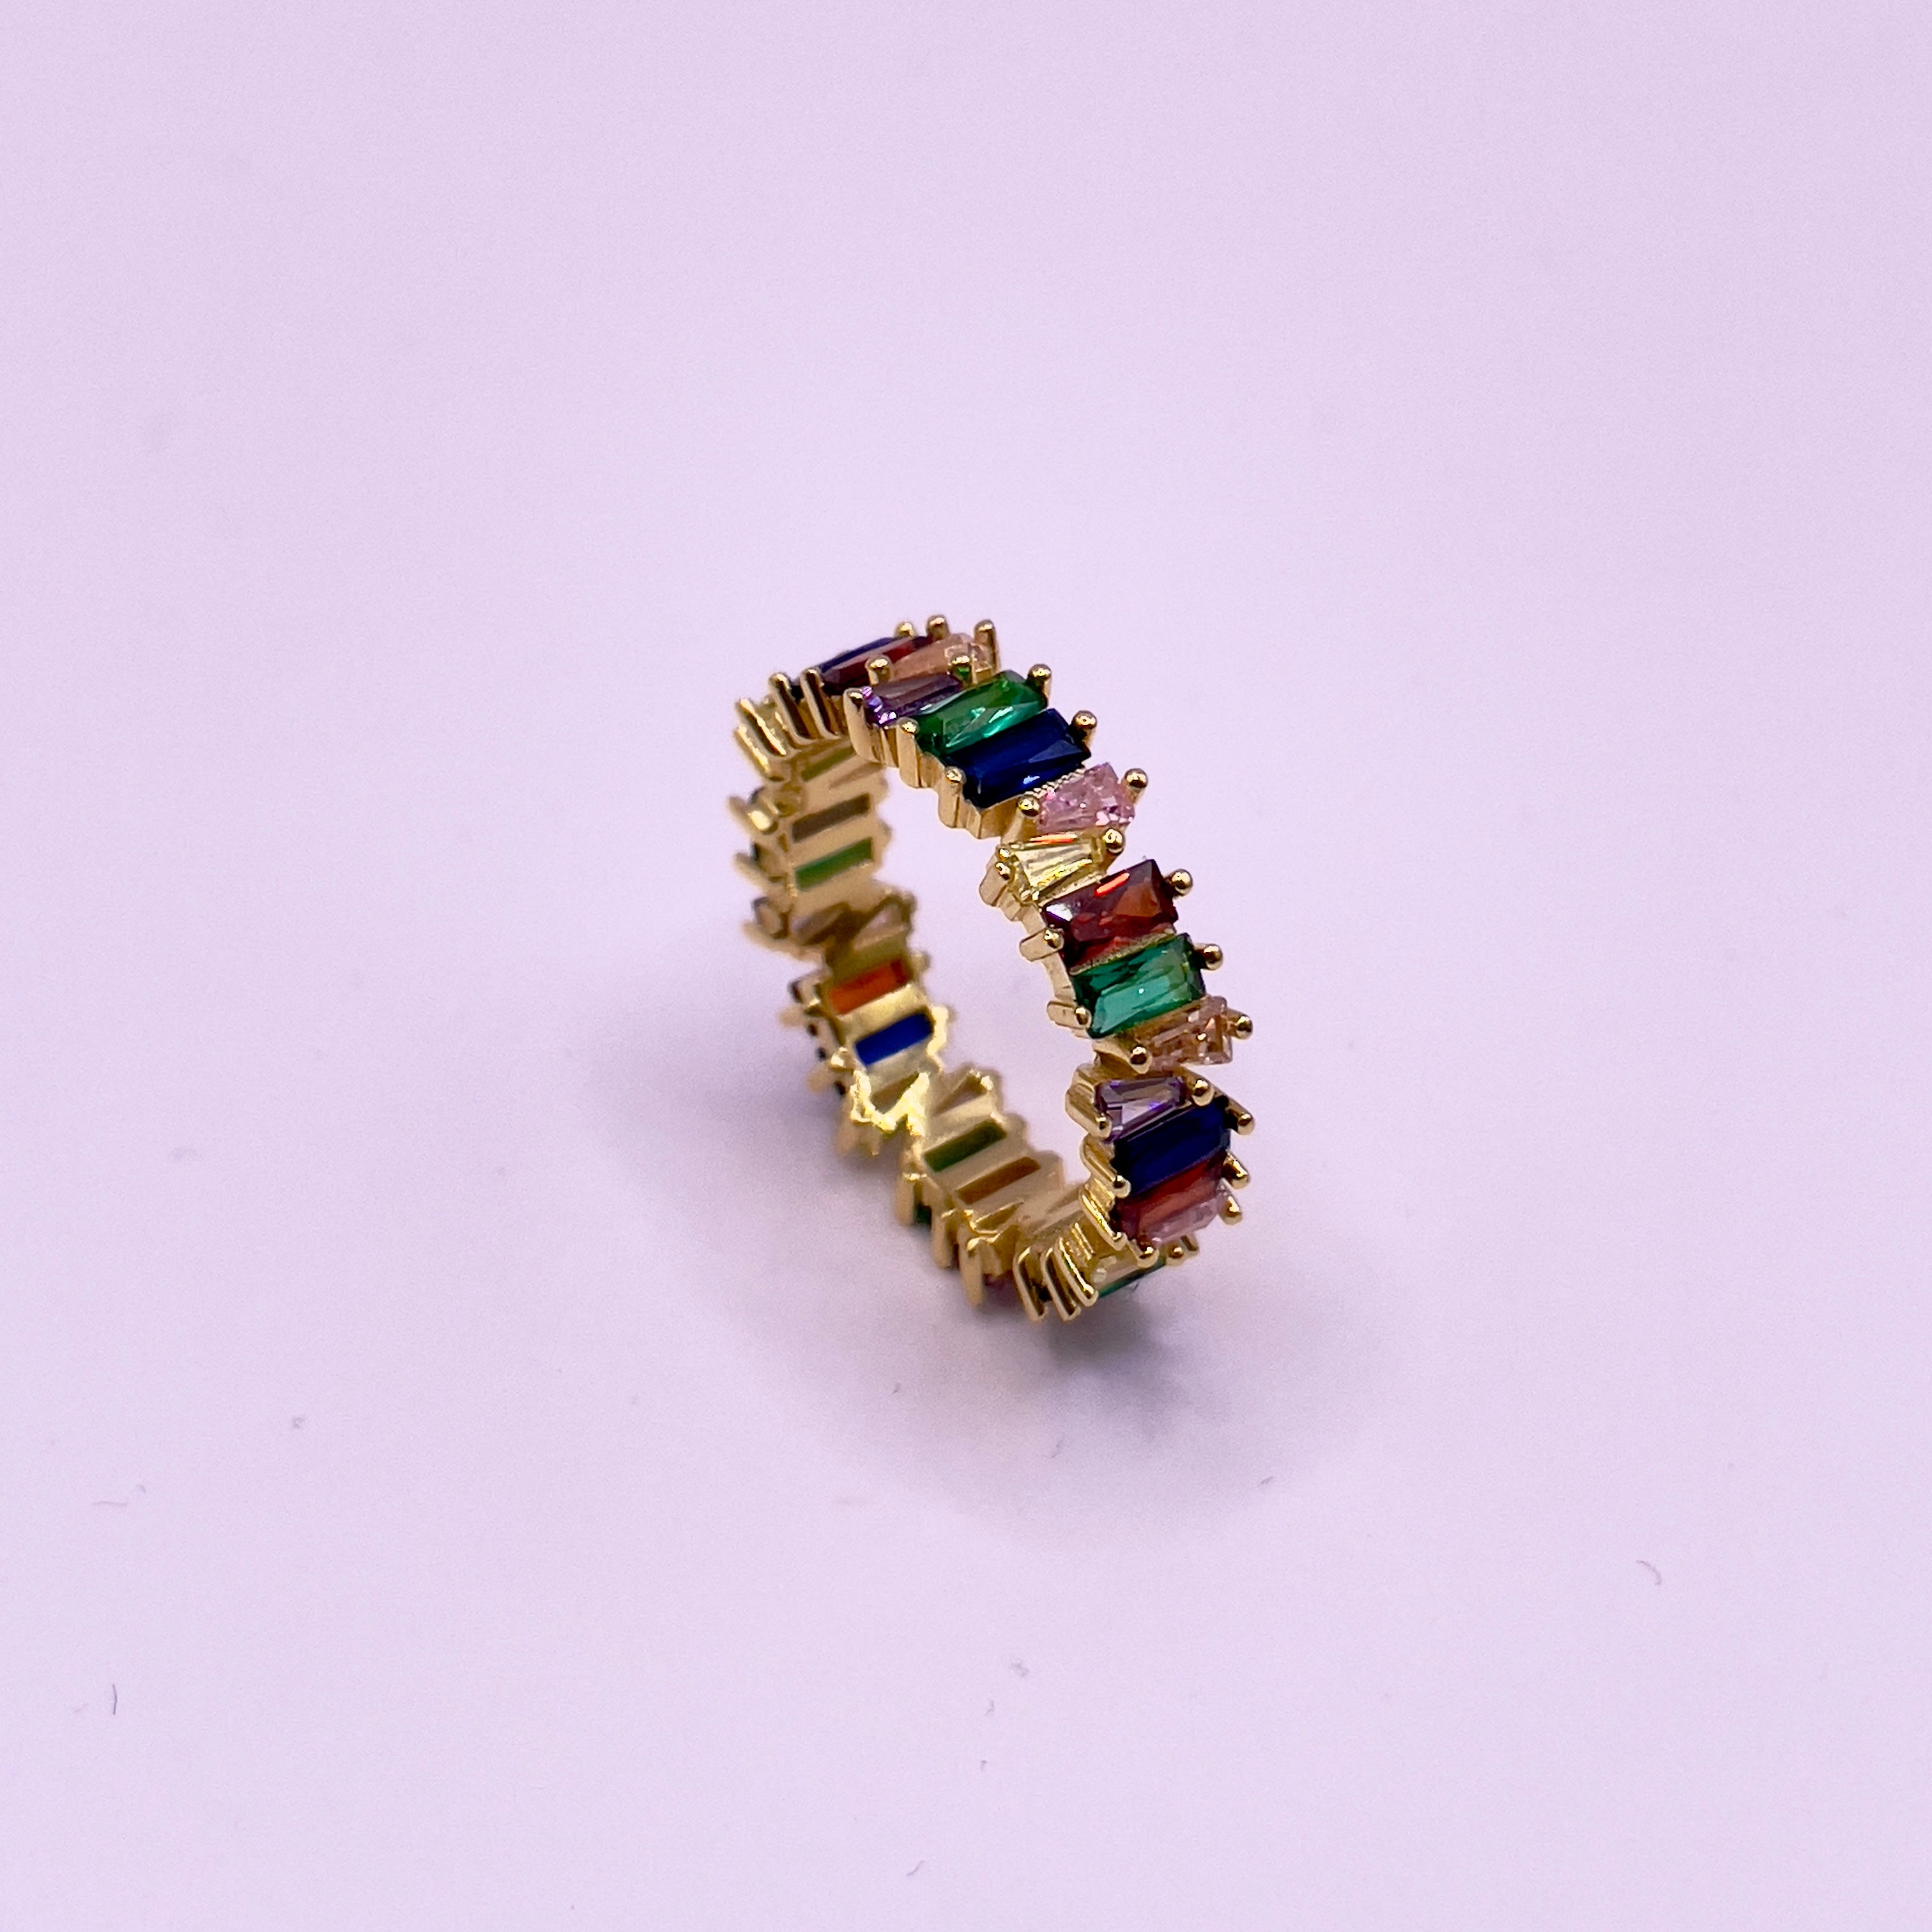 Laxmidas Jewellers - Vadungila - V shaped ring worn by bunt married women  in mangalore, it is also called India Vanki ring. Echoing the rich culture  and traditional values they represent, these